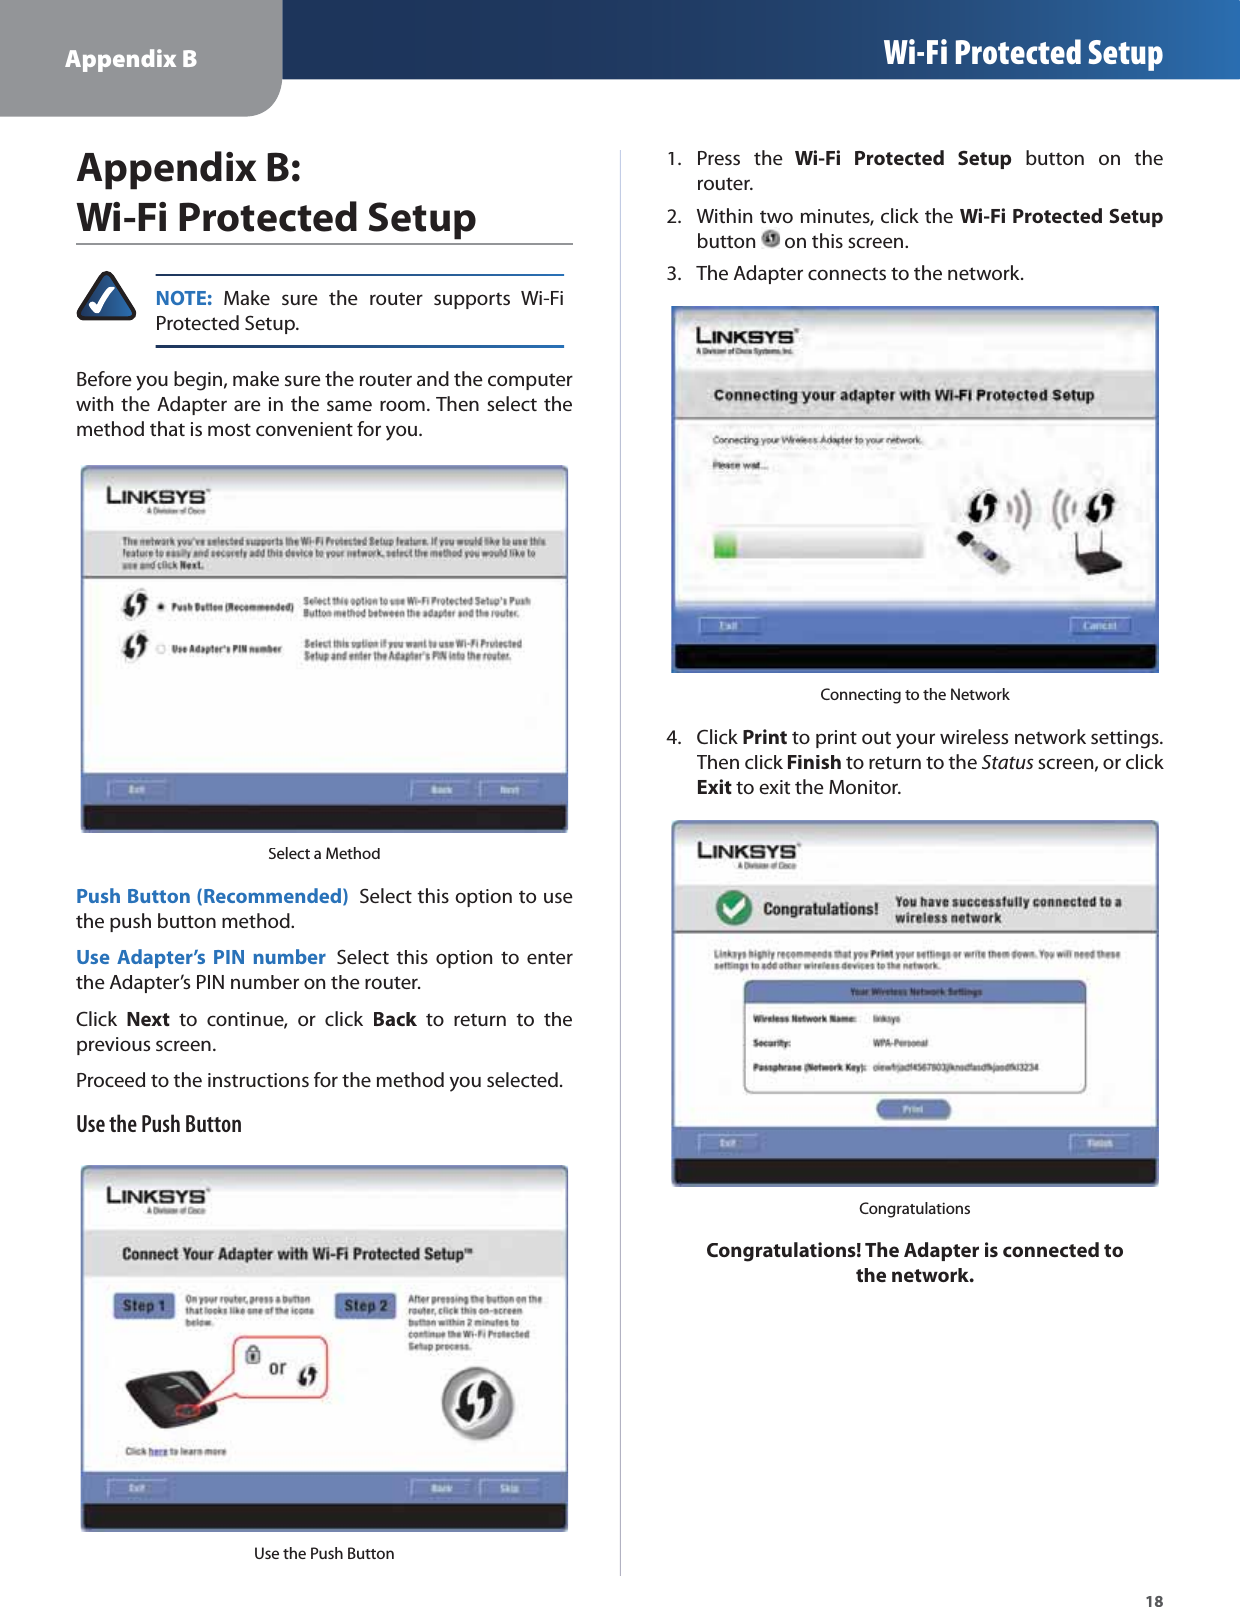 Appendix B Wi-Fi Protected Setup18Appendix B:  Wi-Fi Protected SetupNOTE: Make sure the router supports Wi-FiProtected Setup.Before you begin, make sure the router and the computerwith the Adapter are in the same room. Then select themethod that is most convenient for you.Select a MethodPush Button (Recommended) Select this option to usethe push button method.Use Adapter’s PIN number Select this option to enterthe Adapter’s PIN number on the router.ClickNext to continue, or click Back to return to thekprevious screen.Proceed to the instructions for the method you selected.Use the Push ButtonUse the Push ButtonPress the1.Wi-Fi Protected Setup button on therouter.Within two minutes, click the 2.Wi-Fi Protected Setupbutton on this screen.The Adapter connects to the network.3.Connecting to the NetworkClick4.Printto print out your wireless network settings.Then clickFinishk to return to the Statusscreen, or click Exit to exit the Monitor.CongratulationsCongratulations! The Adapter is connected to the network.